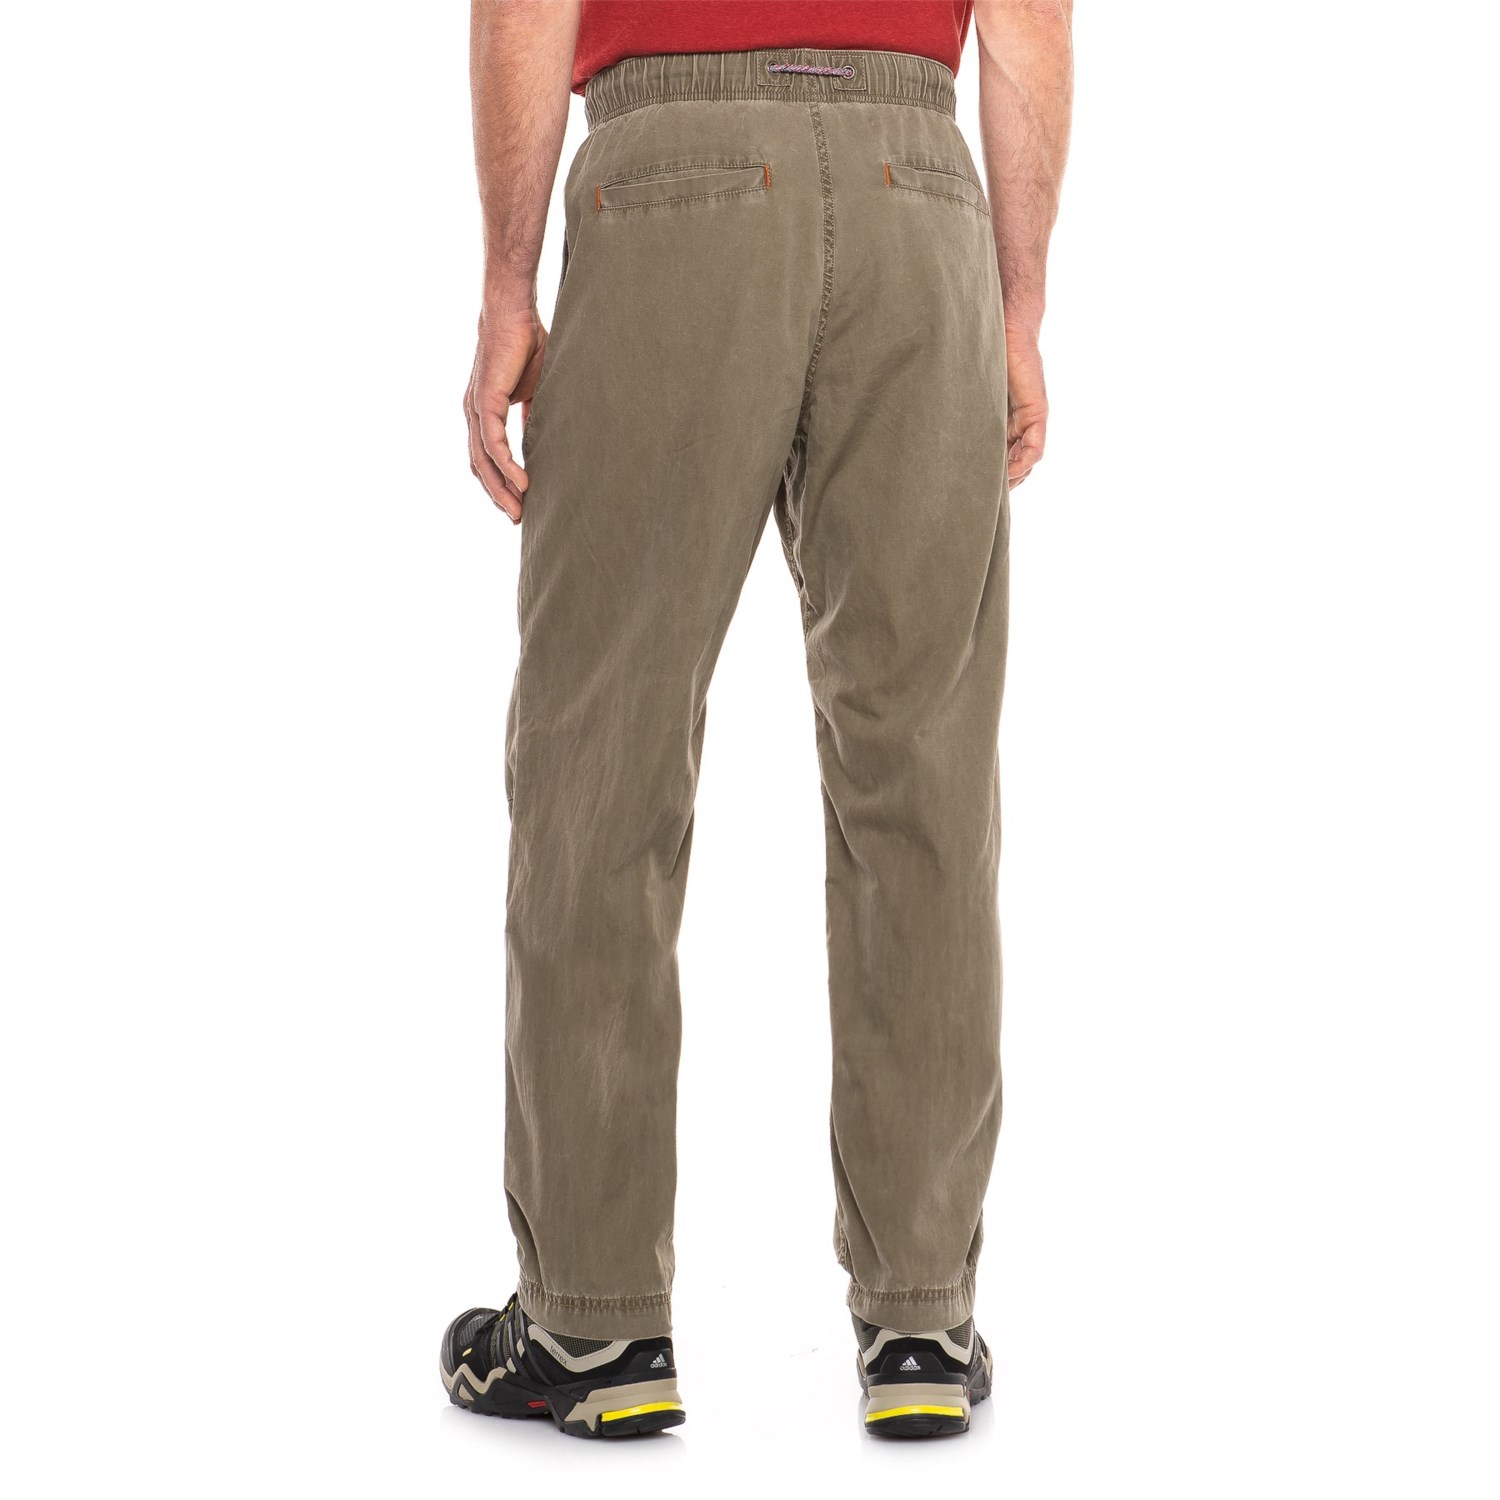 Gramicci Olive Stone All-Access Climbing Pants (For Men) - Save 62%